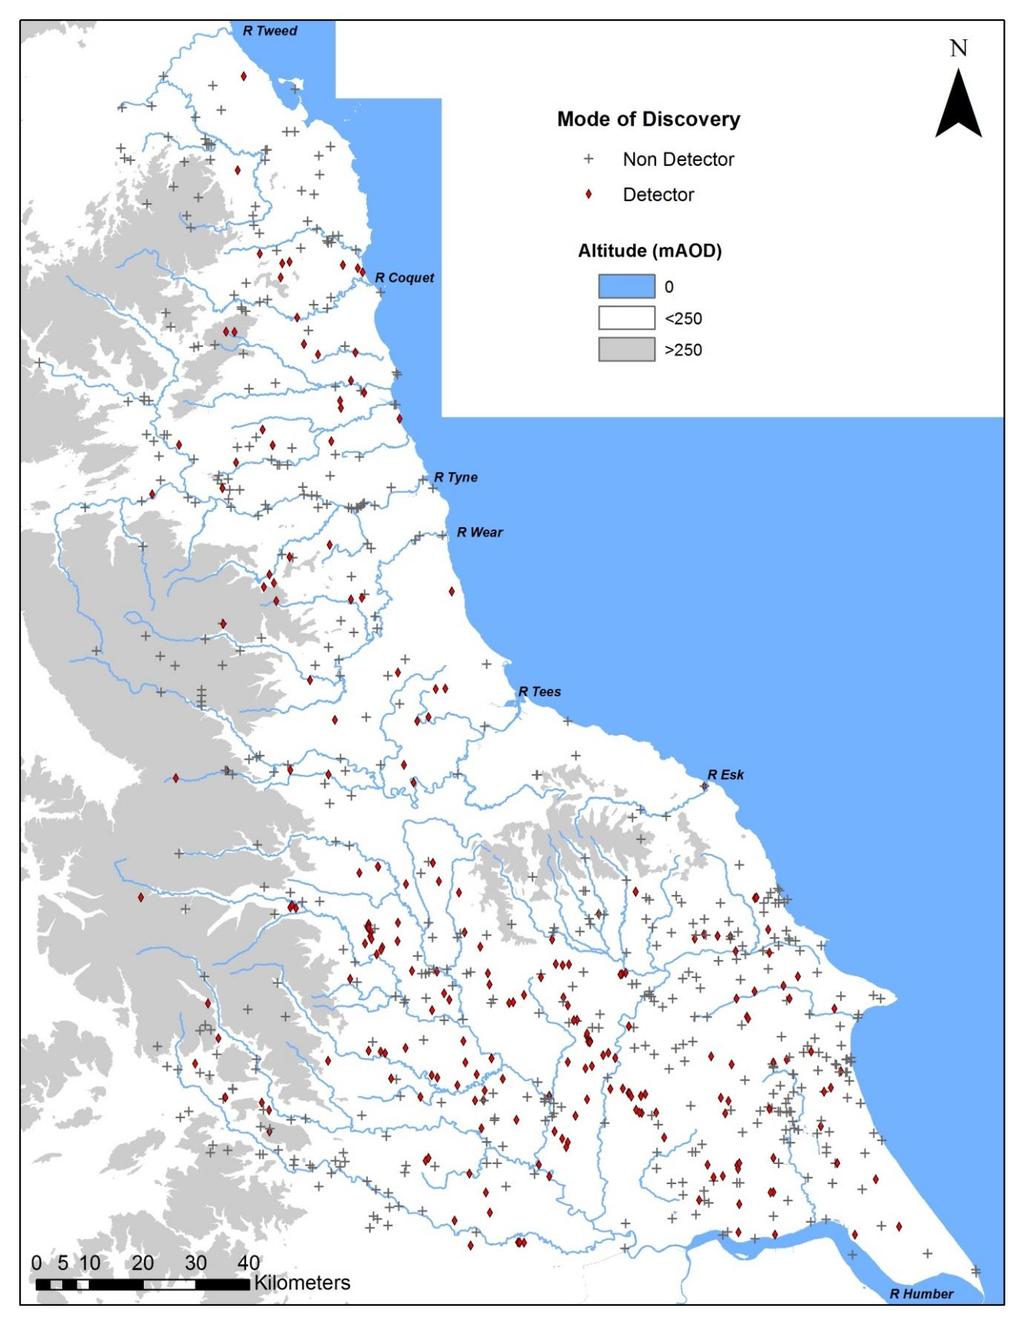 Figure 5.2 Map showing the distributions of metal detector and non-detector finds.